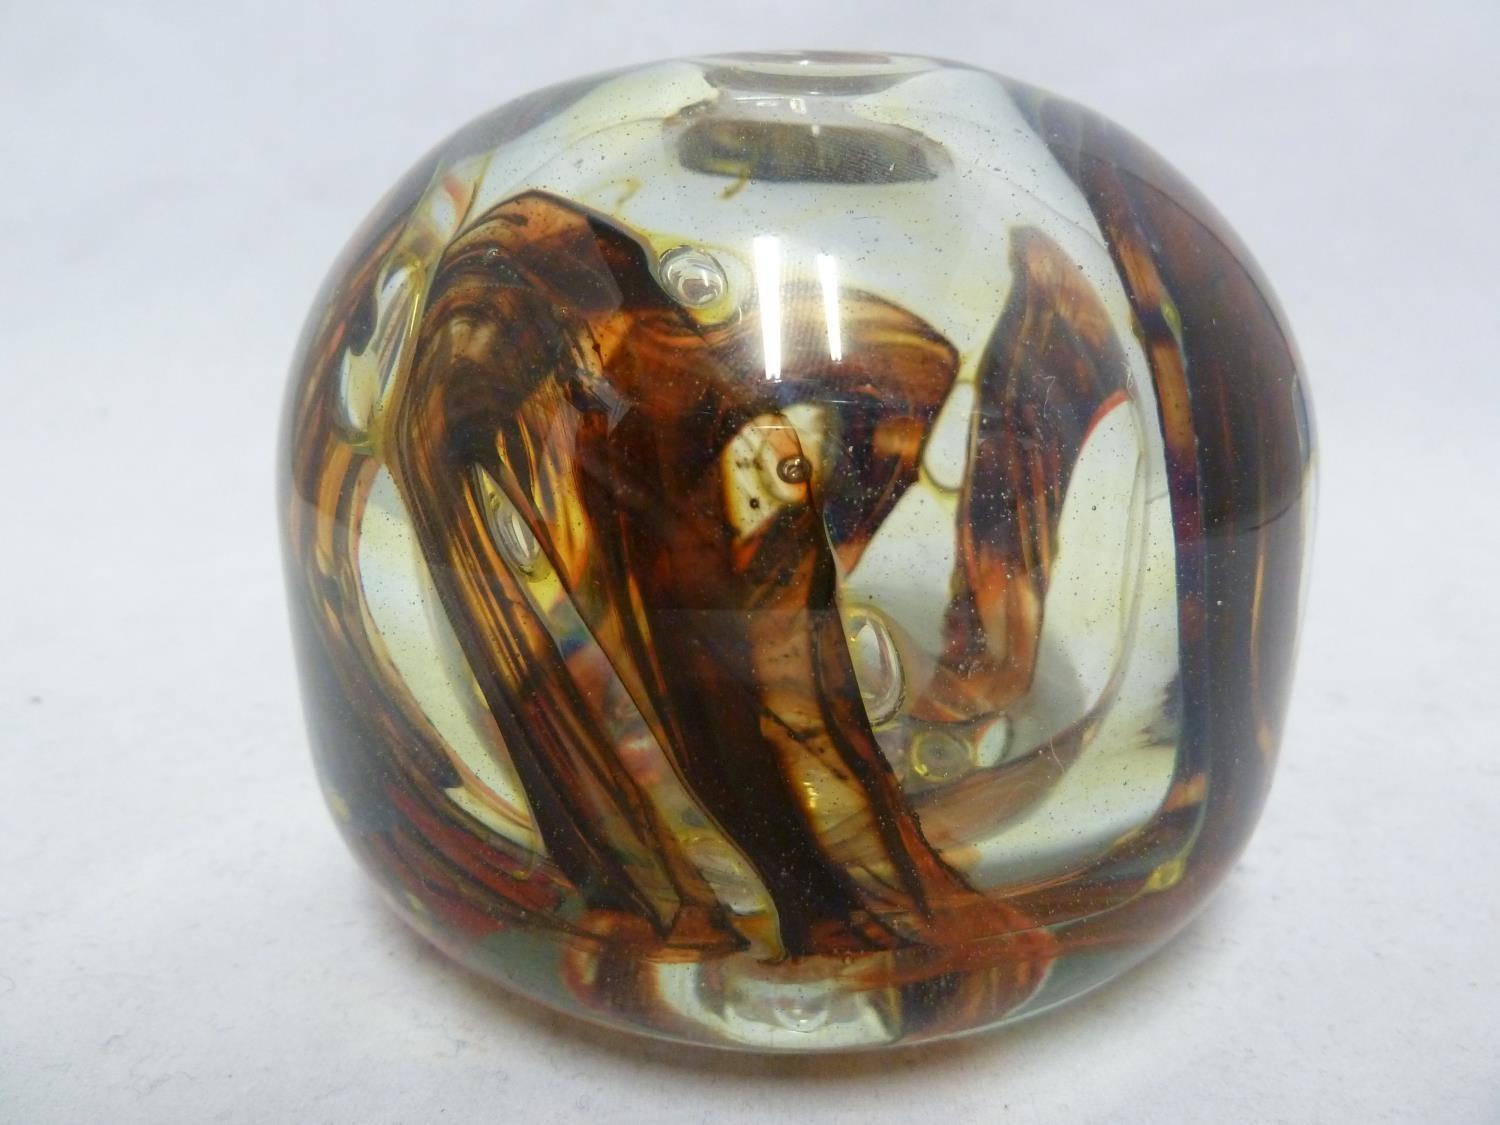 Isle of Wight Glass - an early treacle / tortoiseshell inside out vase, swirled in rich brown, - Image 2 of 9